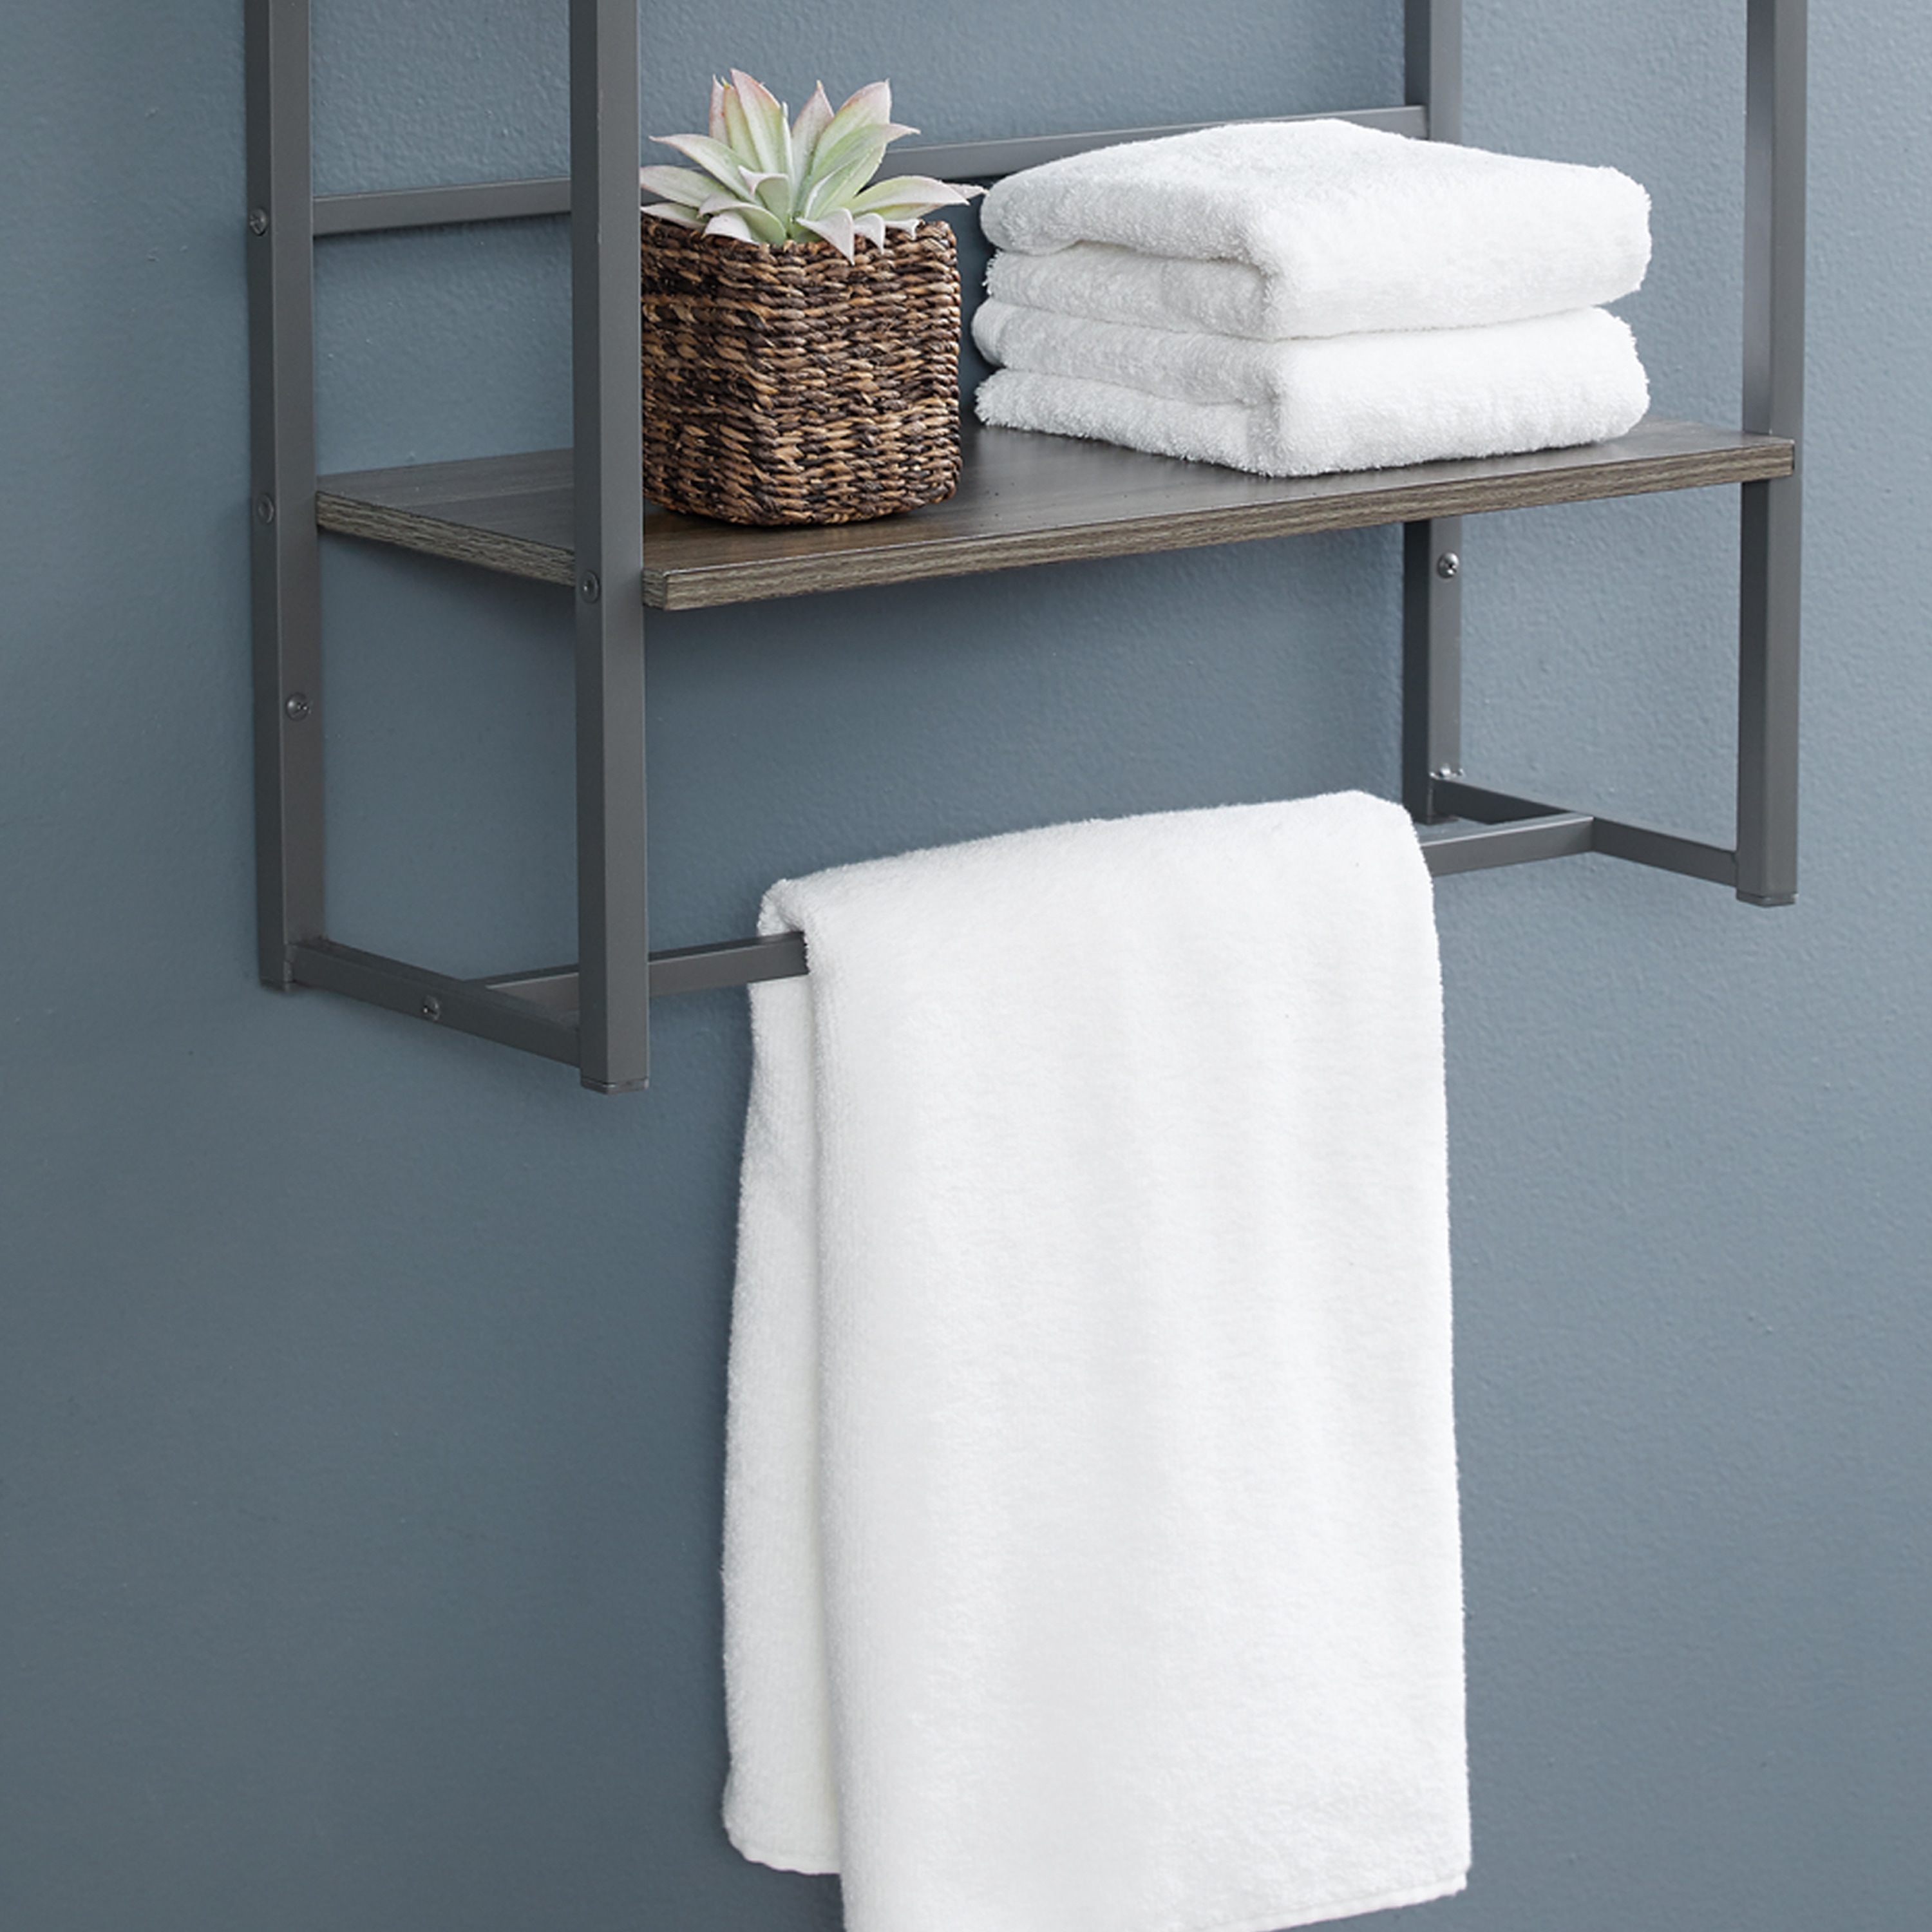 Style Selections Driftwood 24-in x 62-in x 9-in Driftwood 3-Shelf